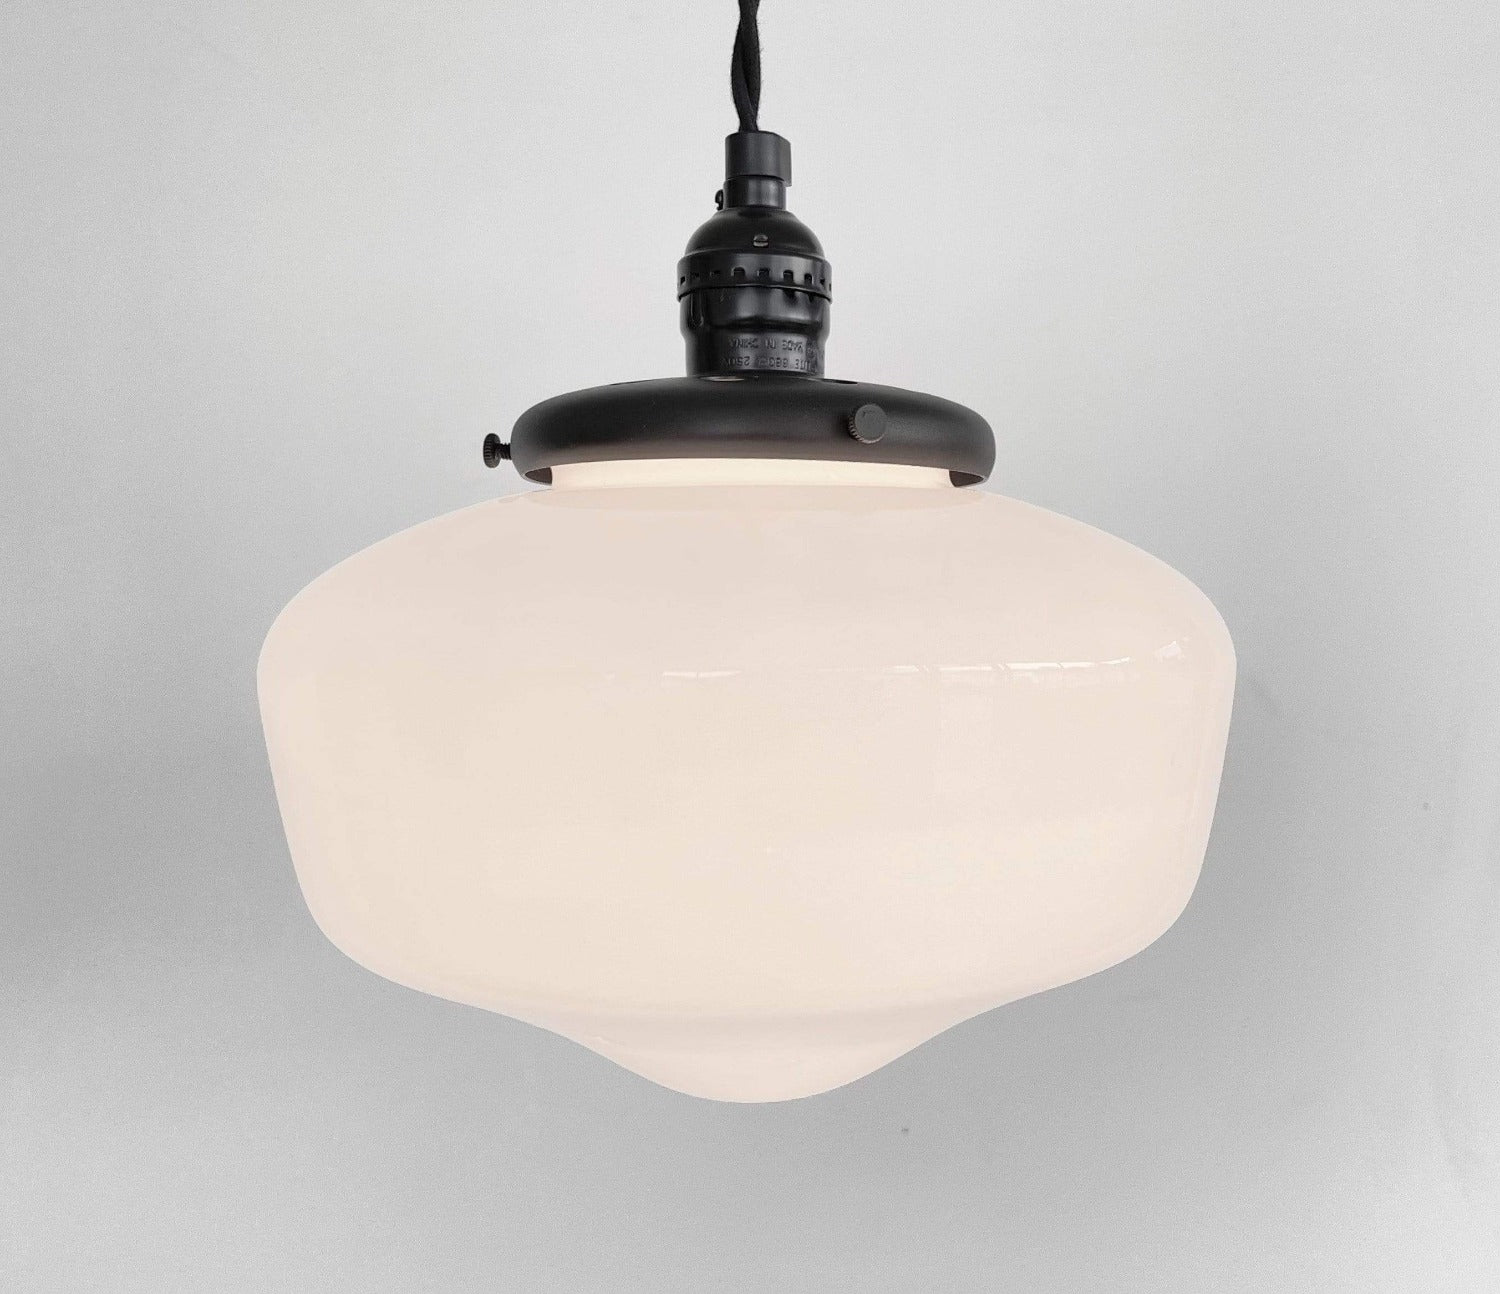 Milk Glass 'Heritage' Pendant Light With Exposed Socket The Lamp Goods